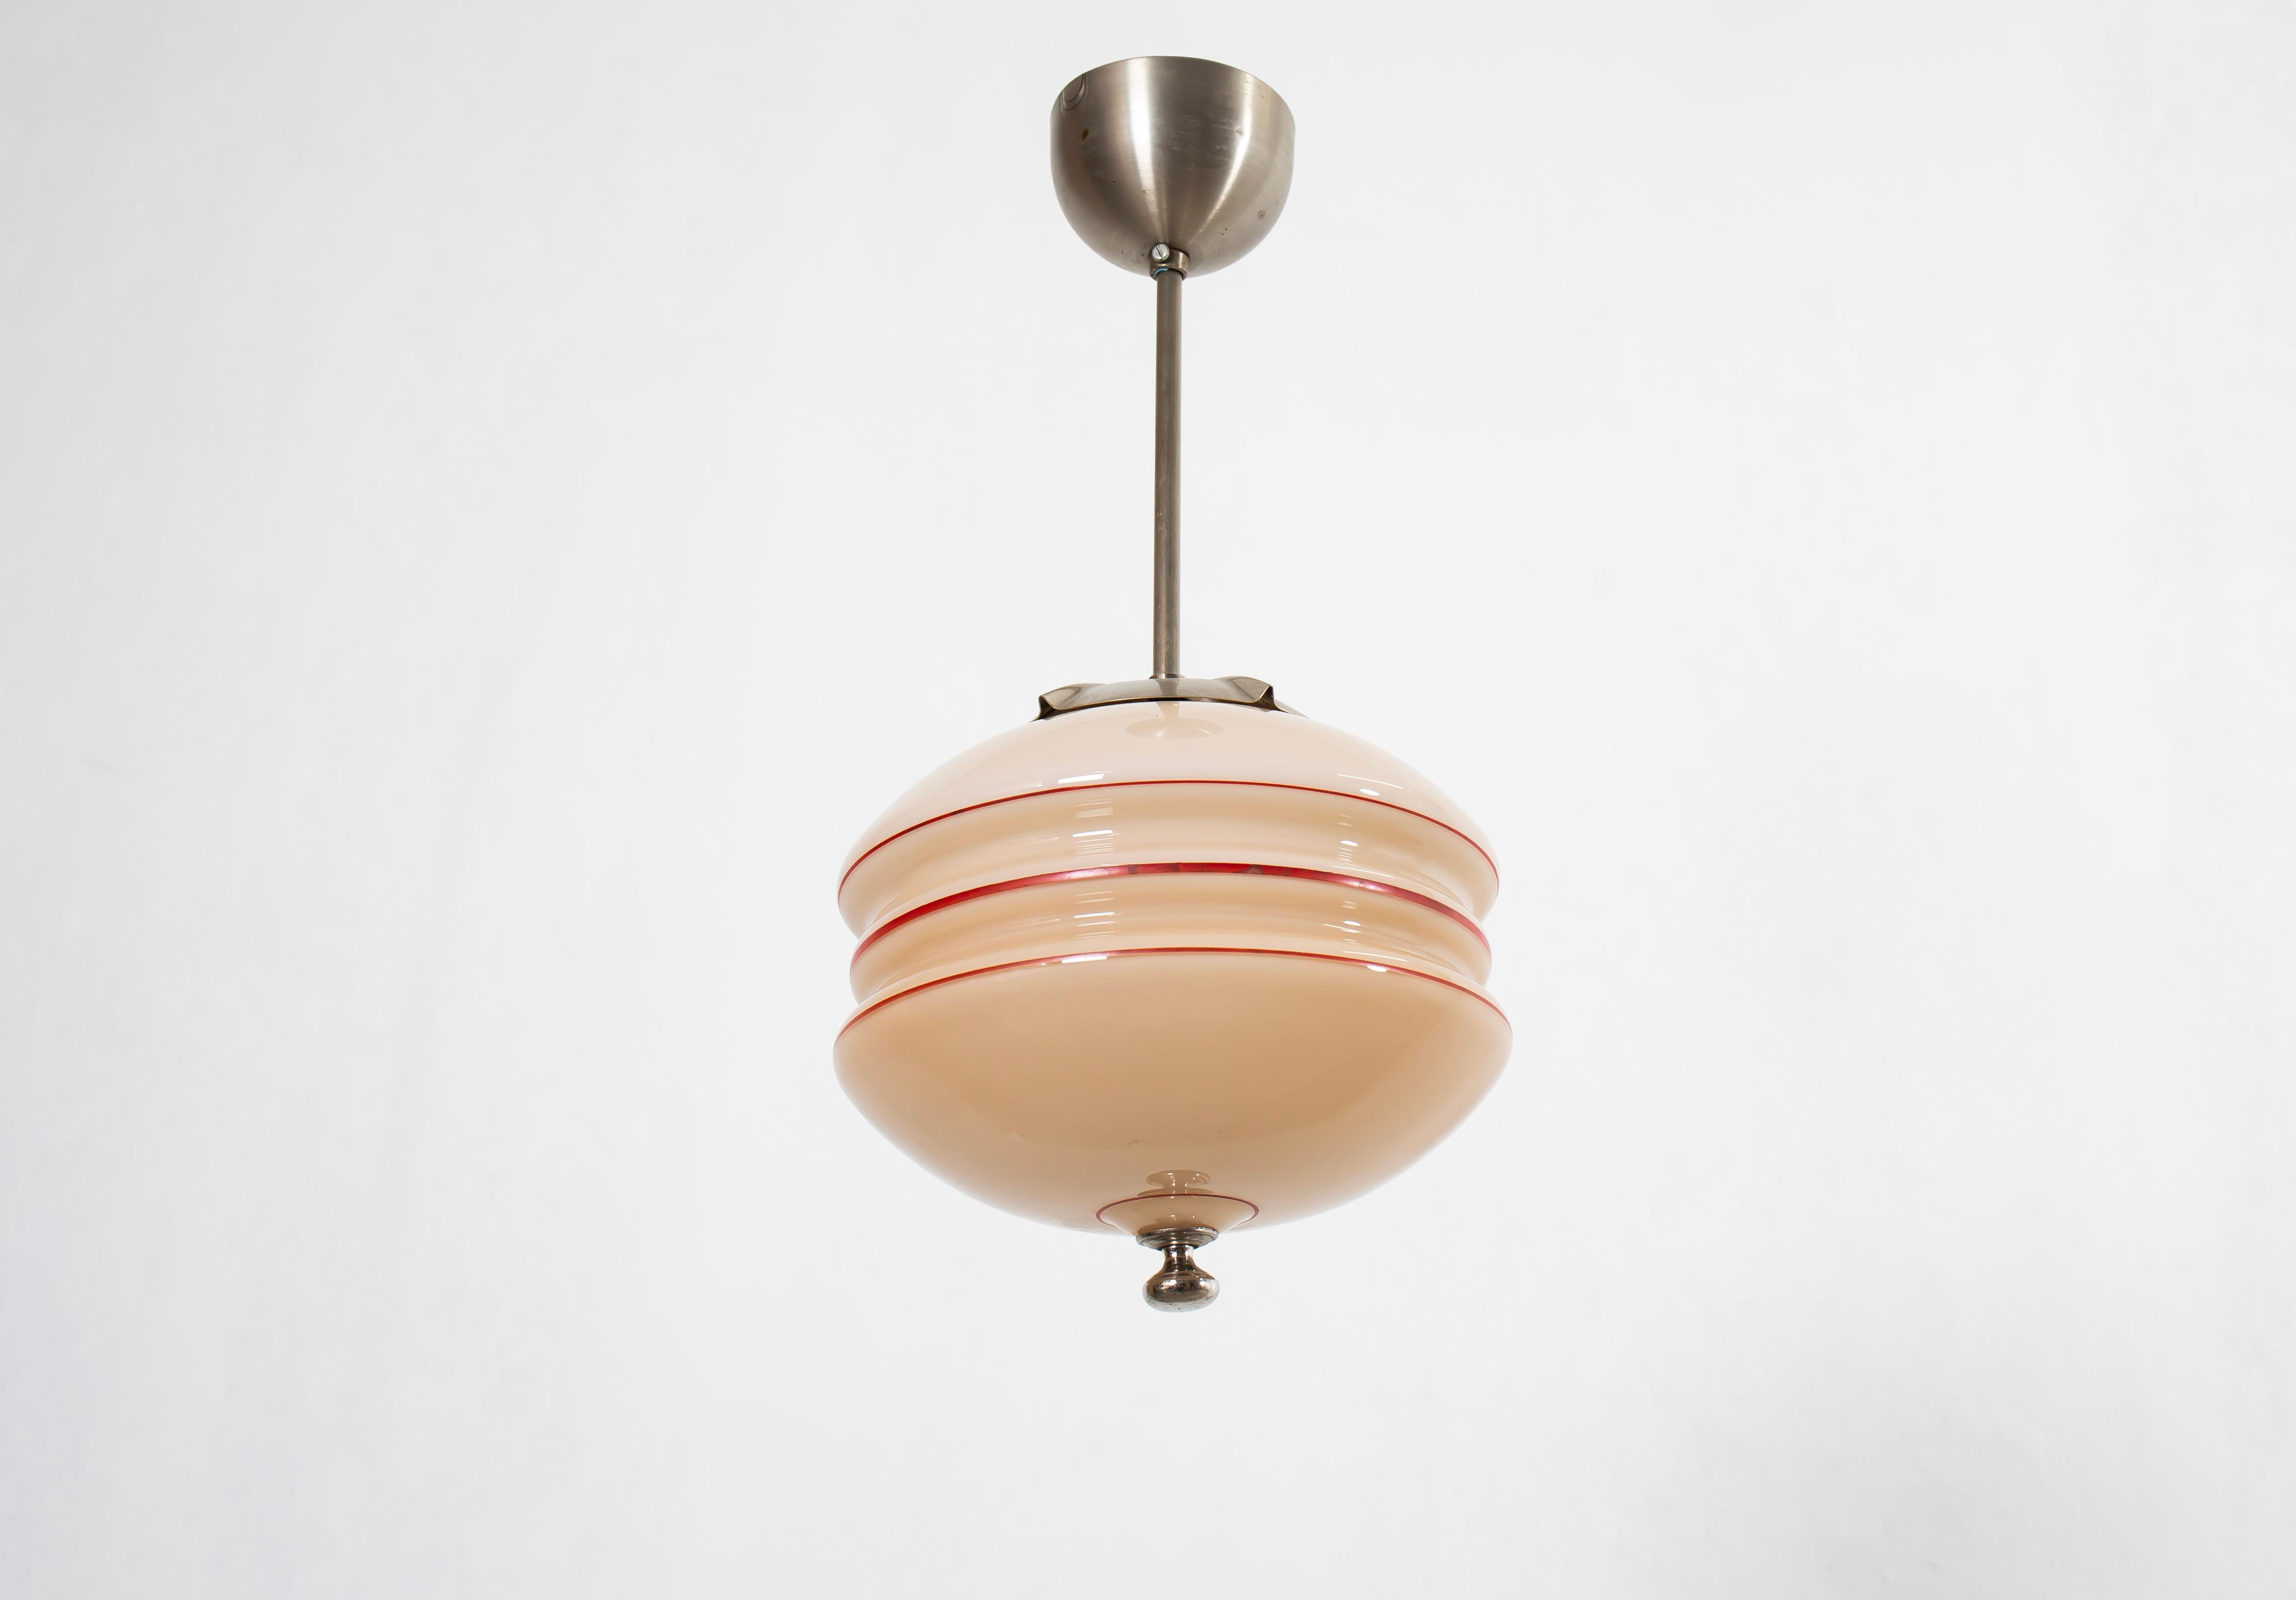 Wonderful ceiling light with decorated glass shade. Designed and made in Norway from ca 1950s first half. The lamp is fully working and in very good vintage condition. It is fitted with one E27 bulb holder (works in the US) and carries a max wattage